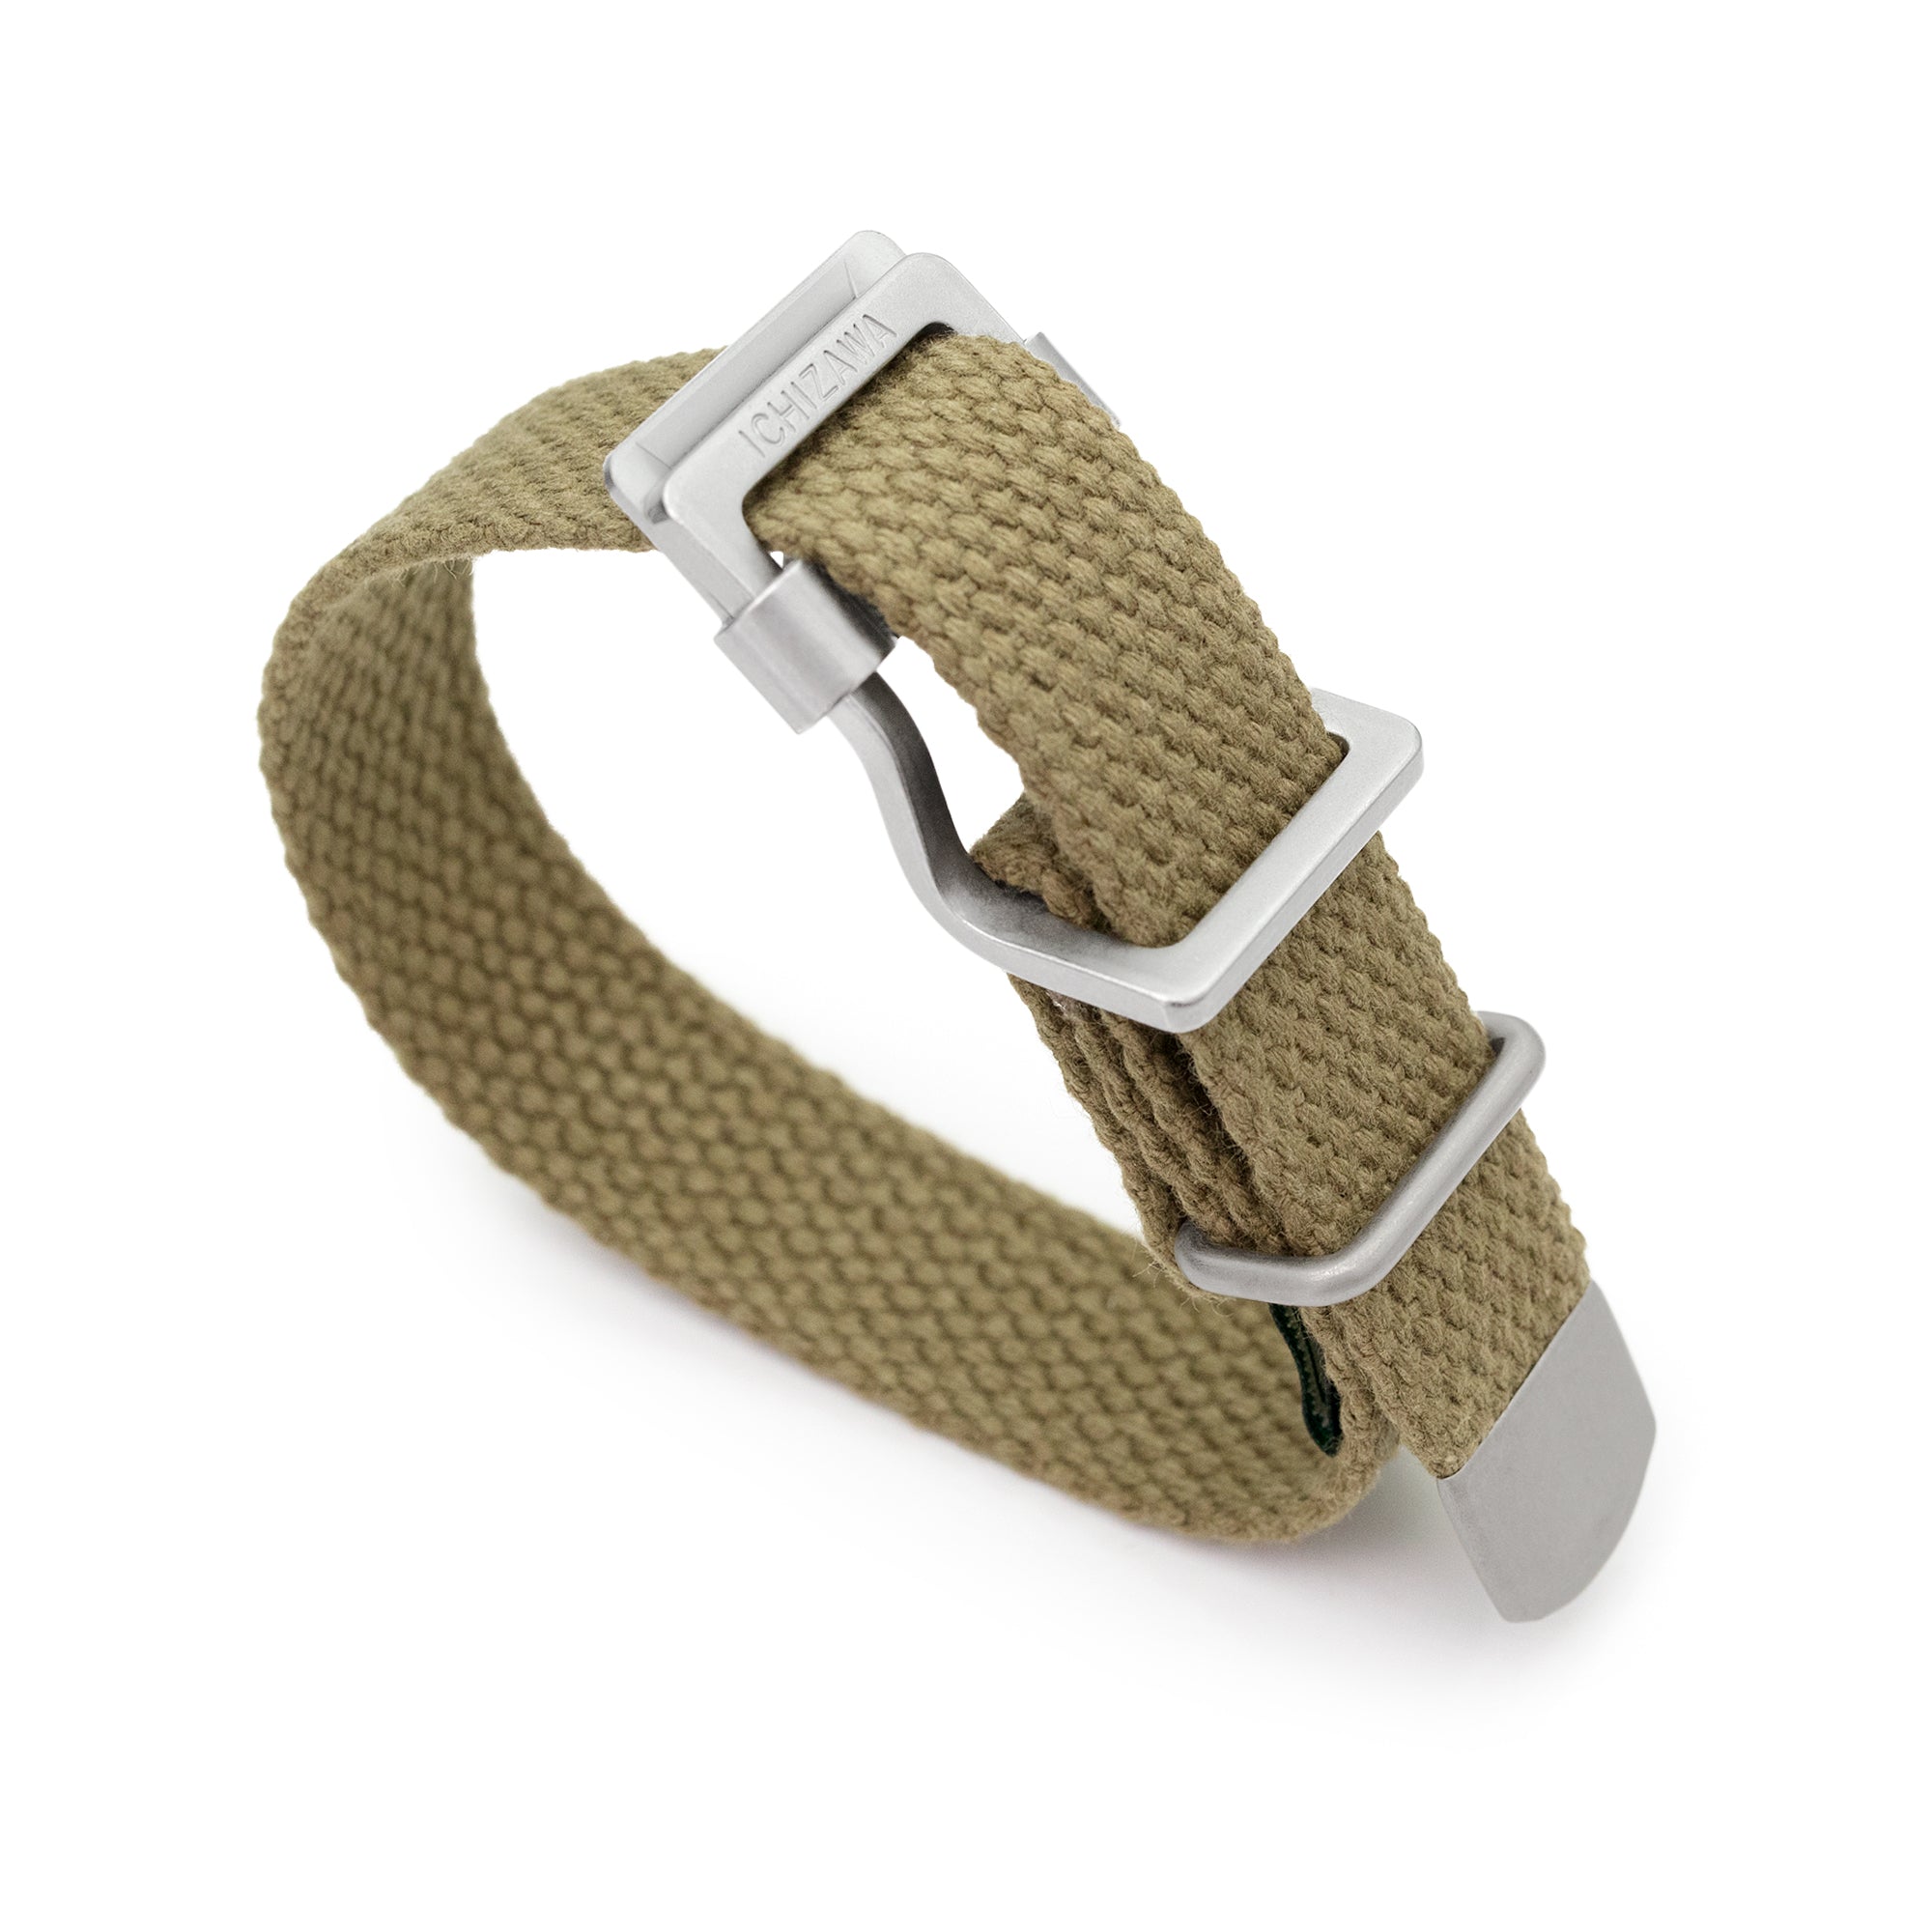 19mm Japanese Heavy Cotton Canvas Watch Strap, Olive Green Strapcode watch bands